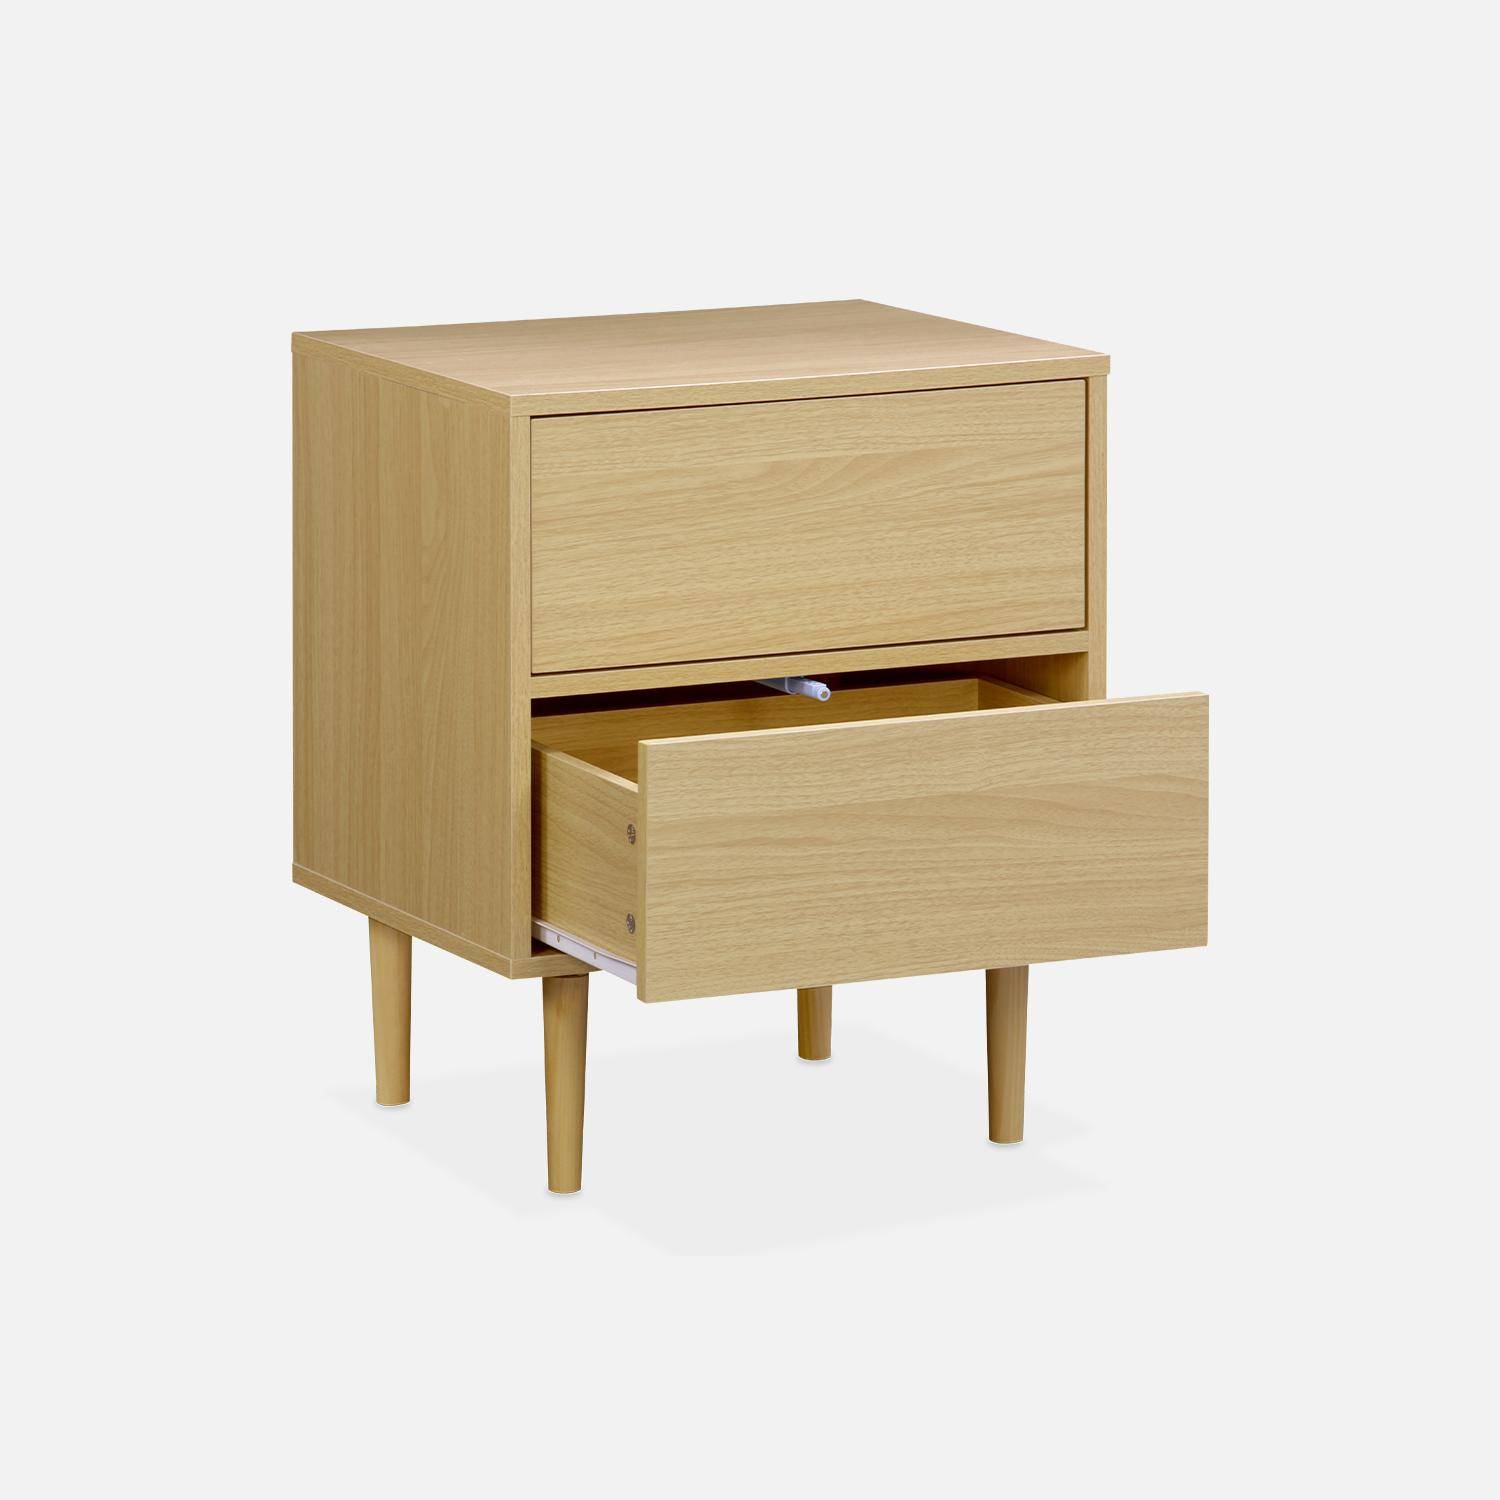 Pair of wood-effect bedside tables with two drawers, 48x40x59cm - Mika - Natural Wood Photo6